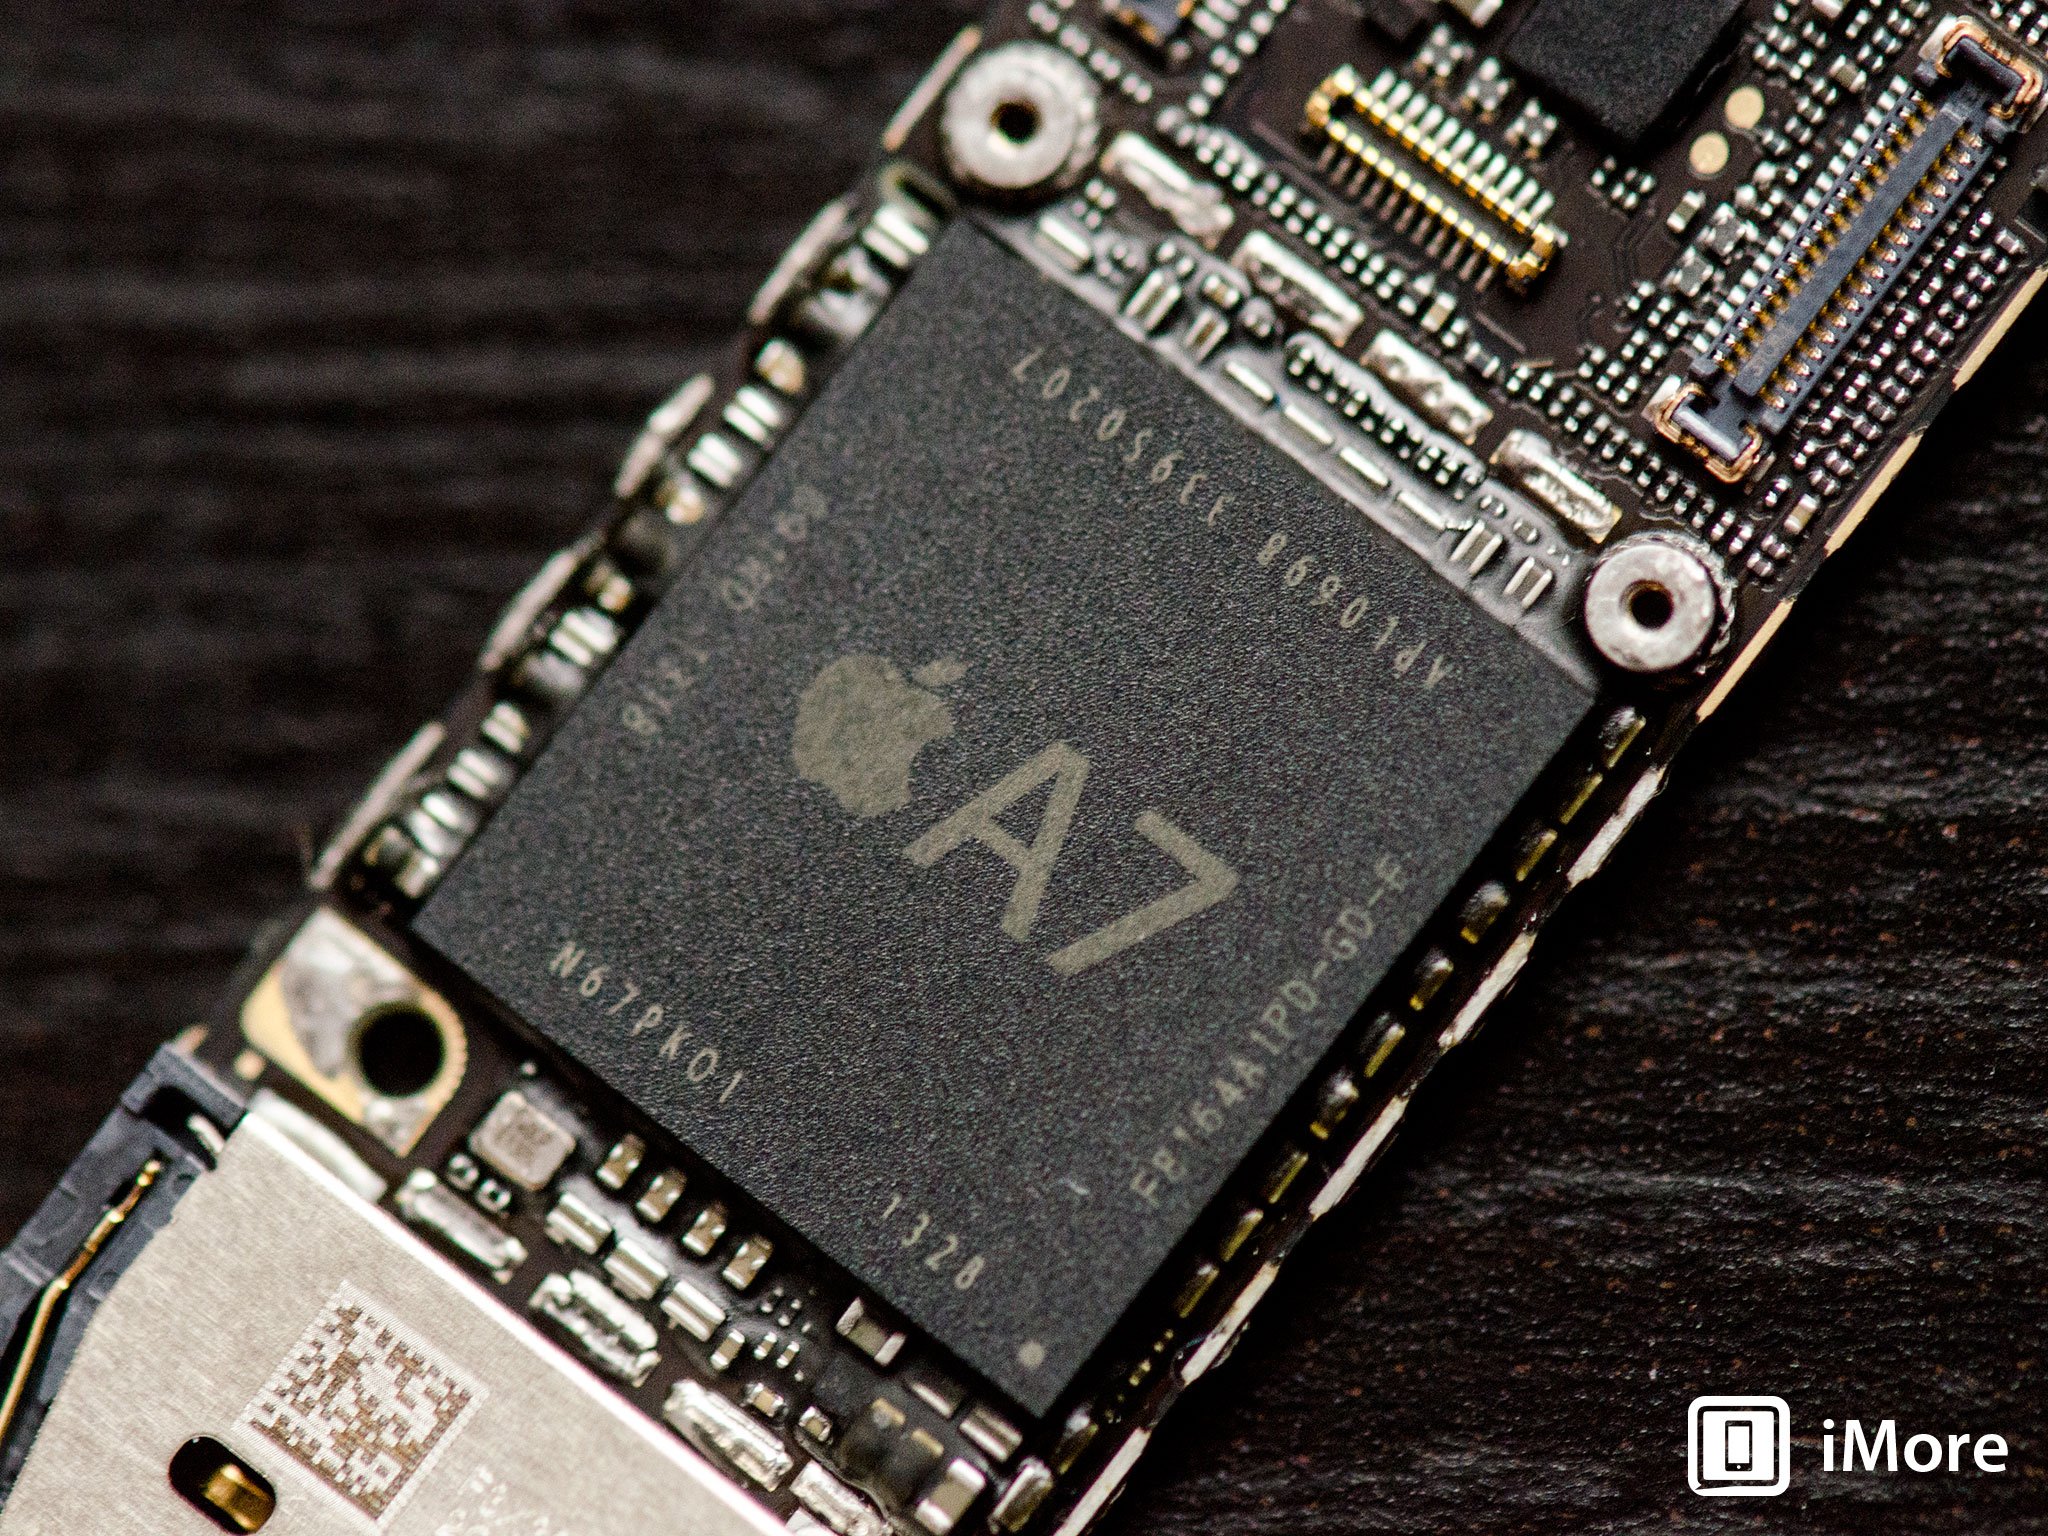 Apple A7 in the iPhone 5s